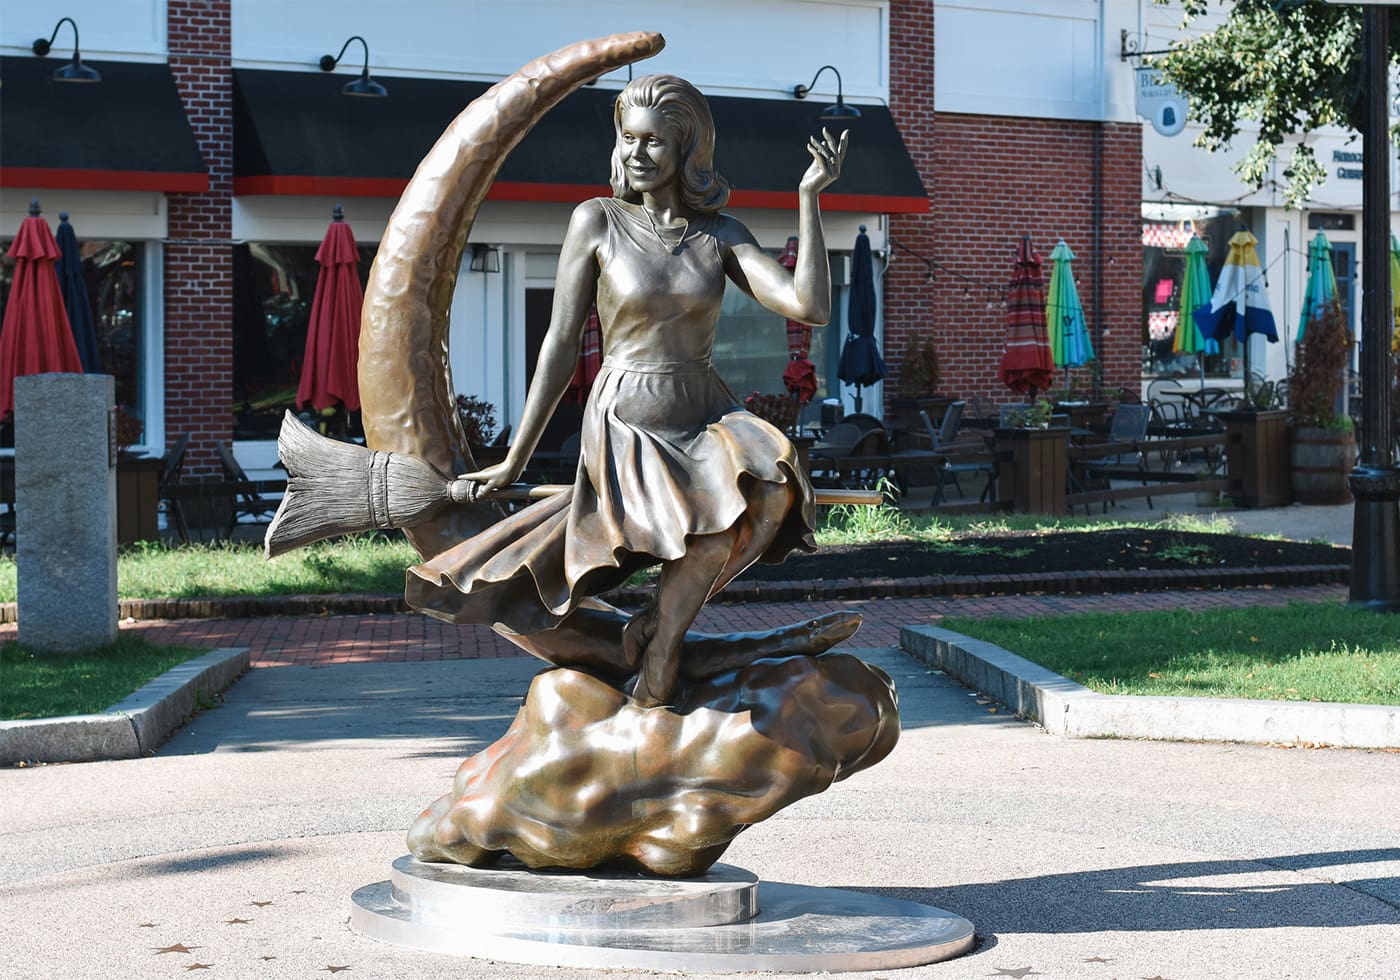 The Bewitched Statue in Salem, Massachusetts